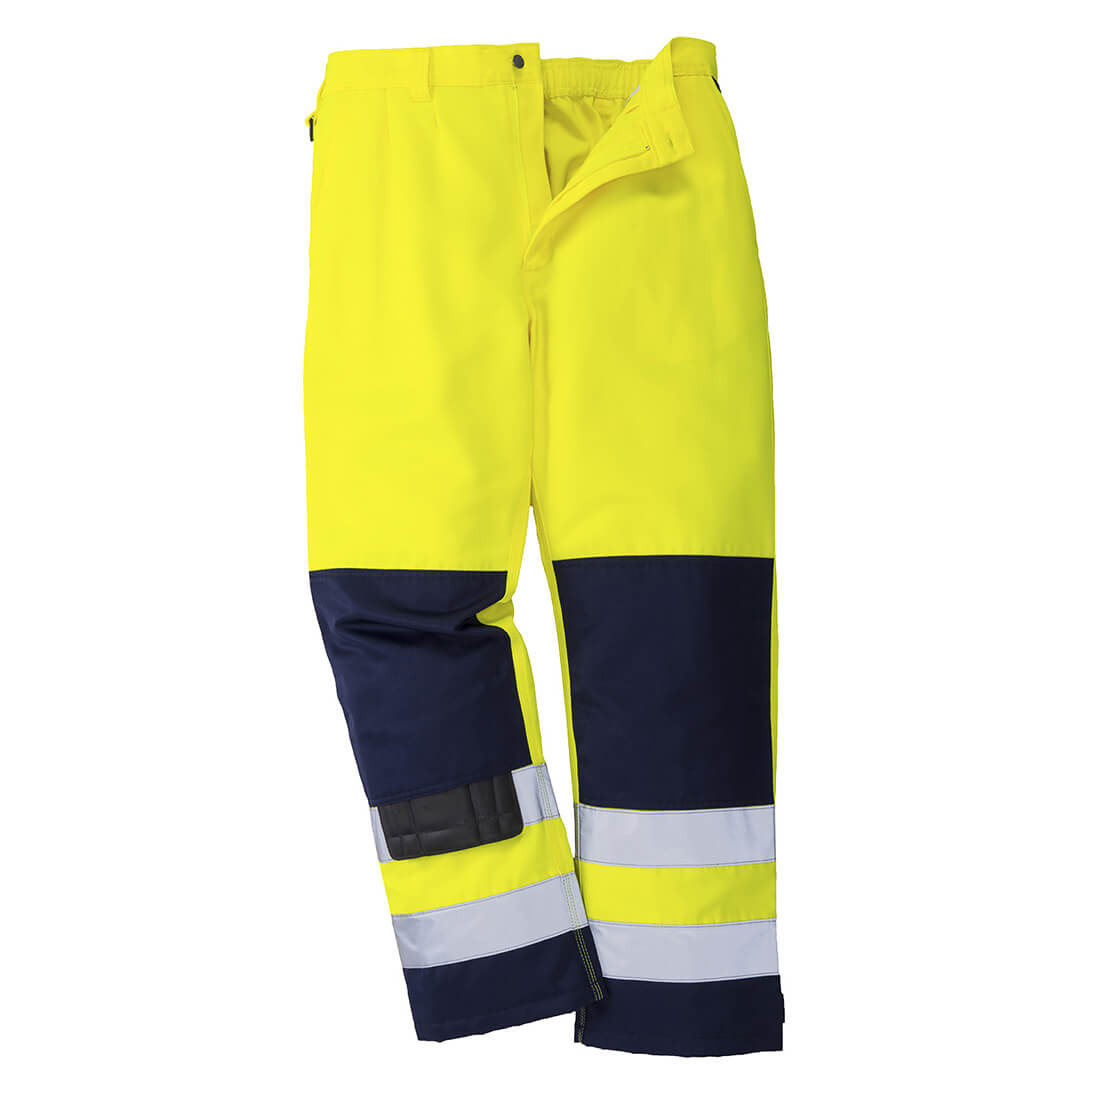 Photo of Portwest Seville Hi Vis Work Trousers Yellow / Navy Xl